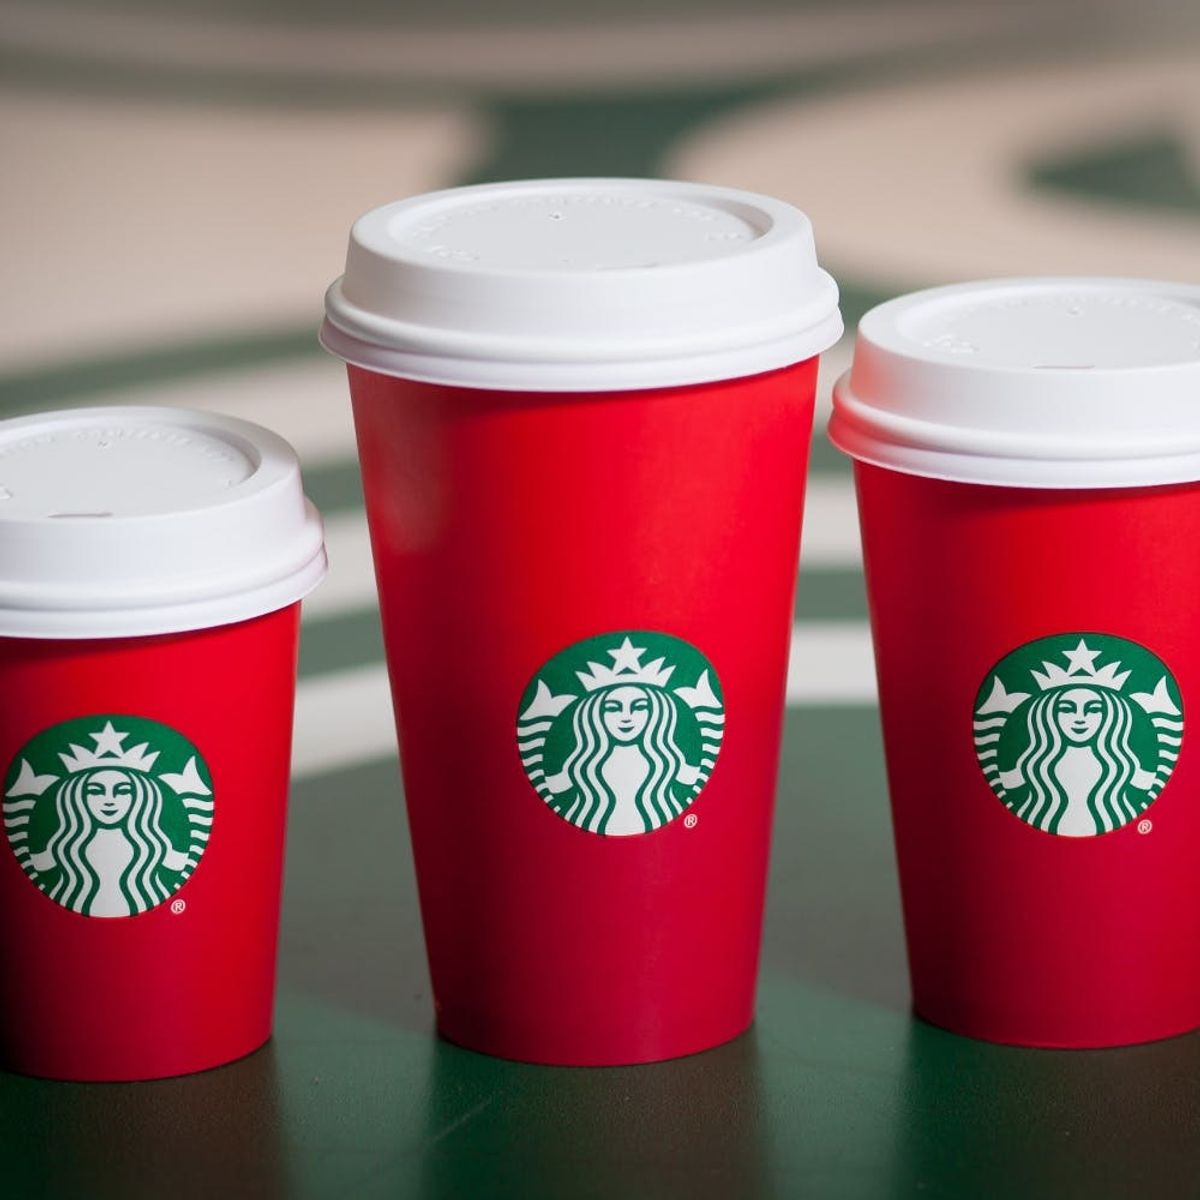 Here’s Why Starbucks Insists on Using Their Own Drink Size Names